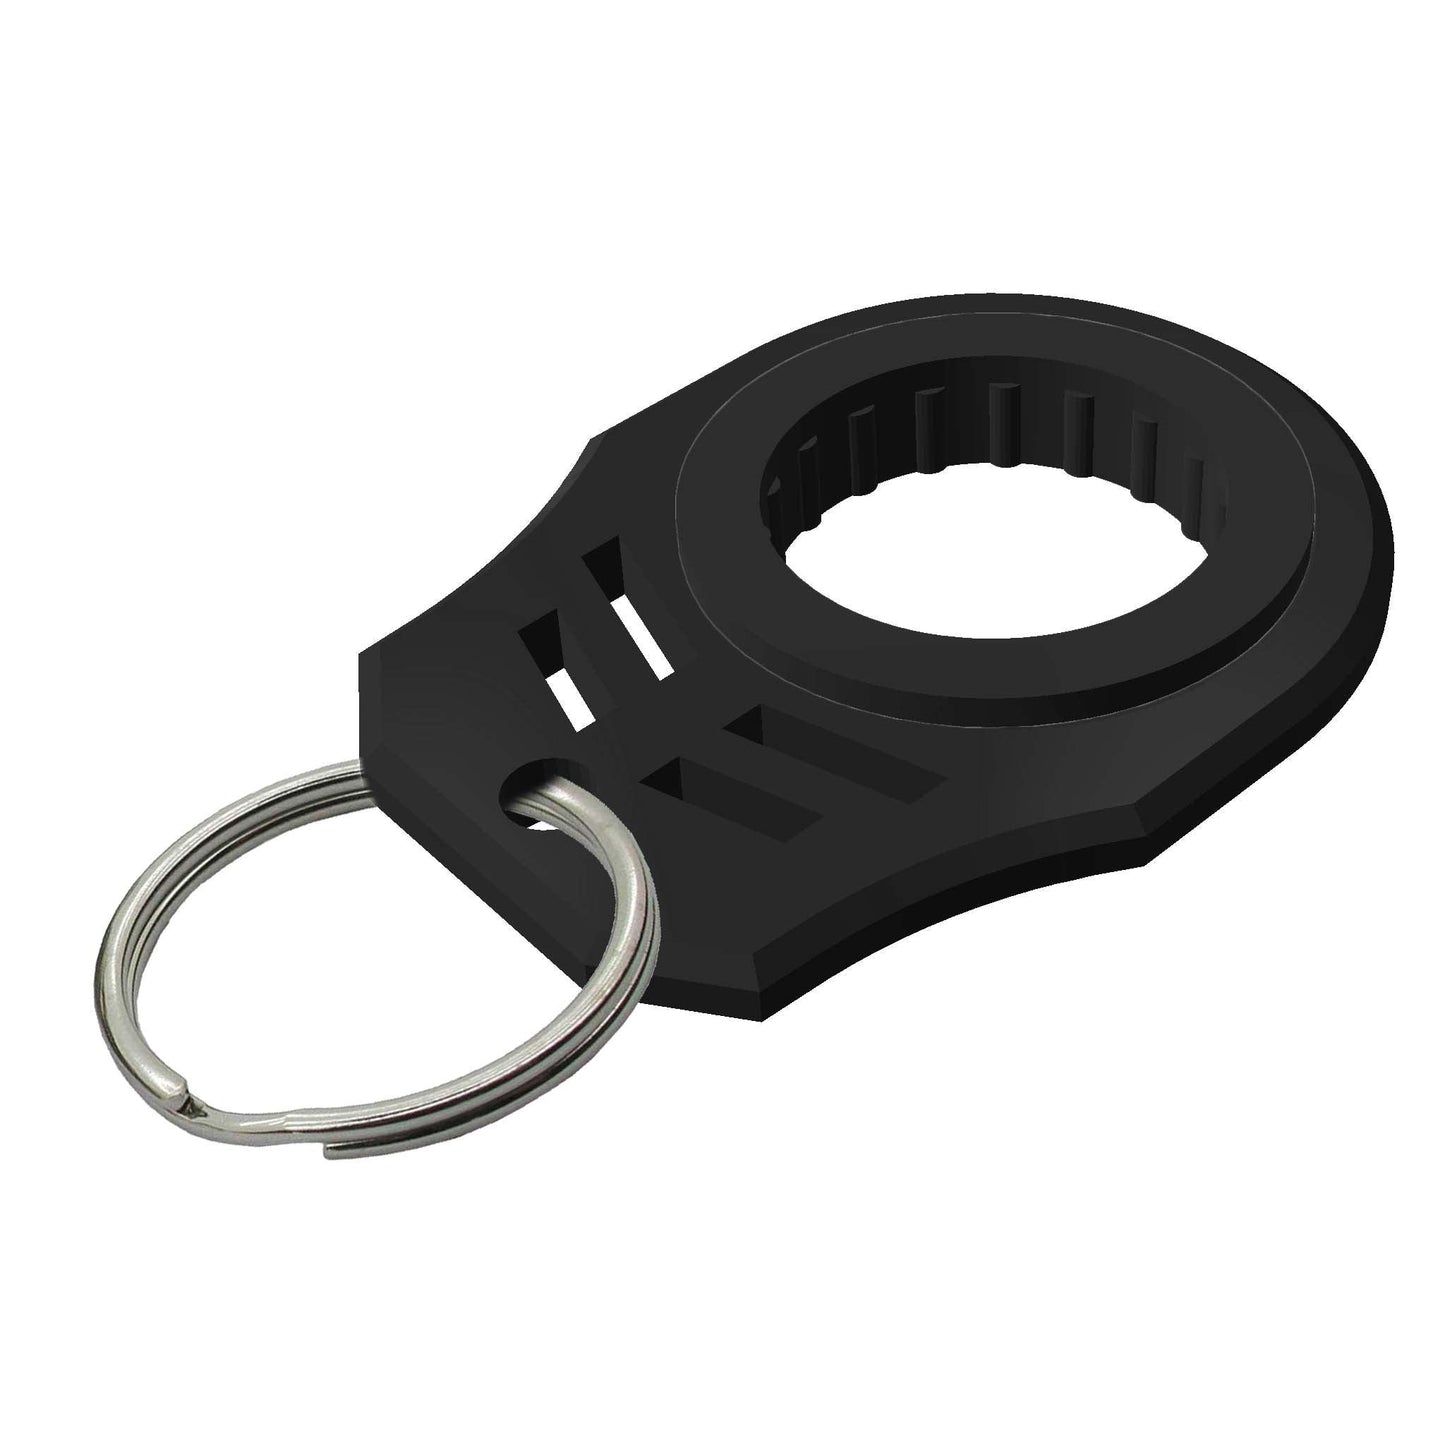 Key Ring Spinner for Everyday Use